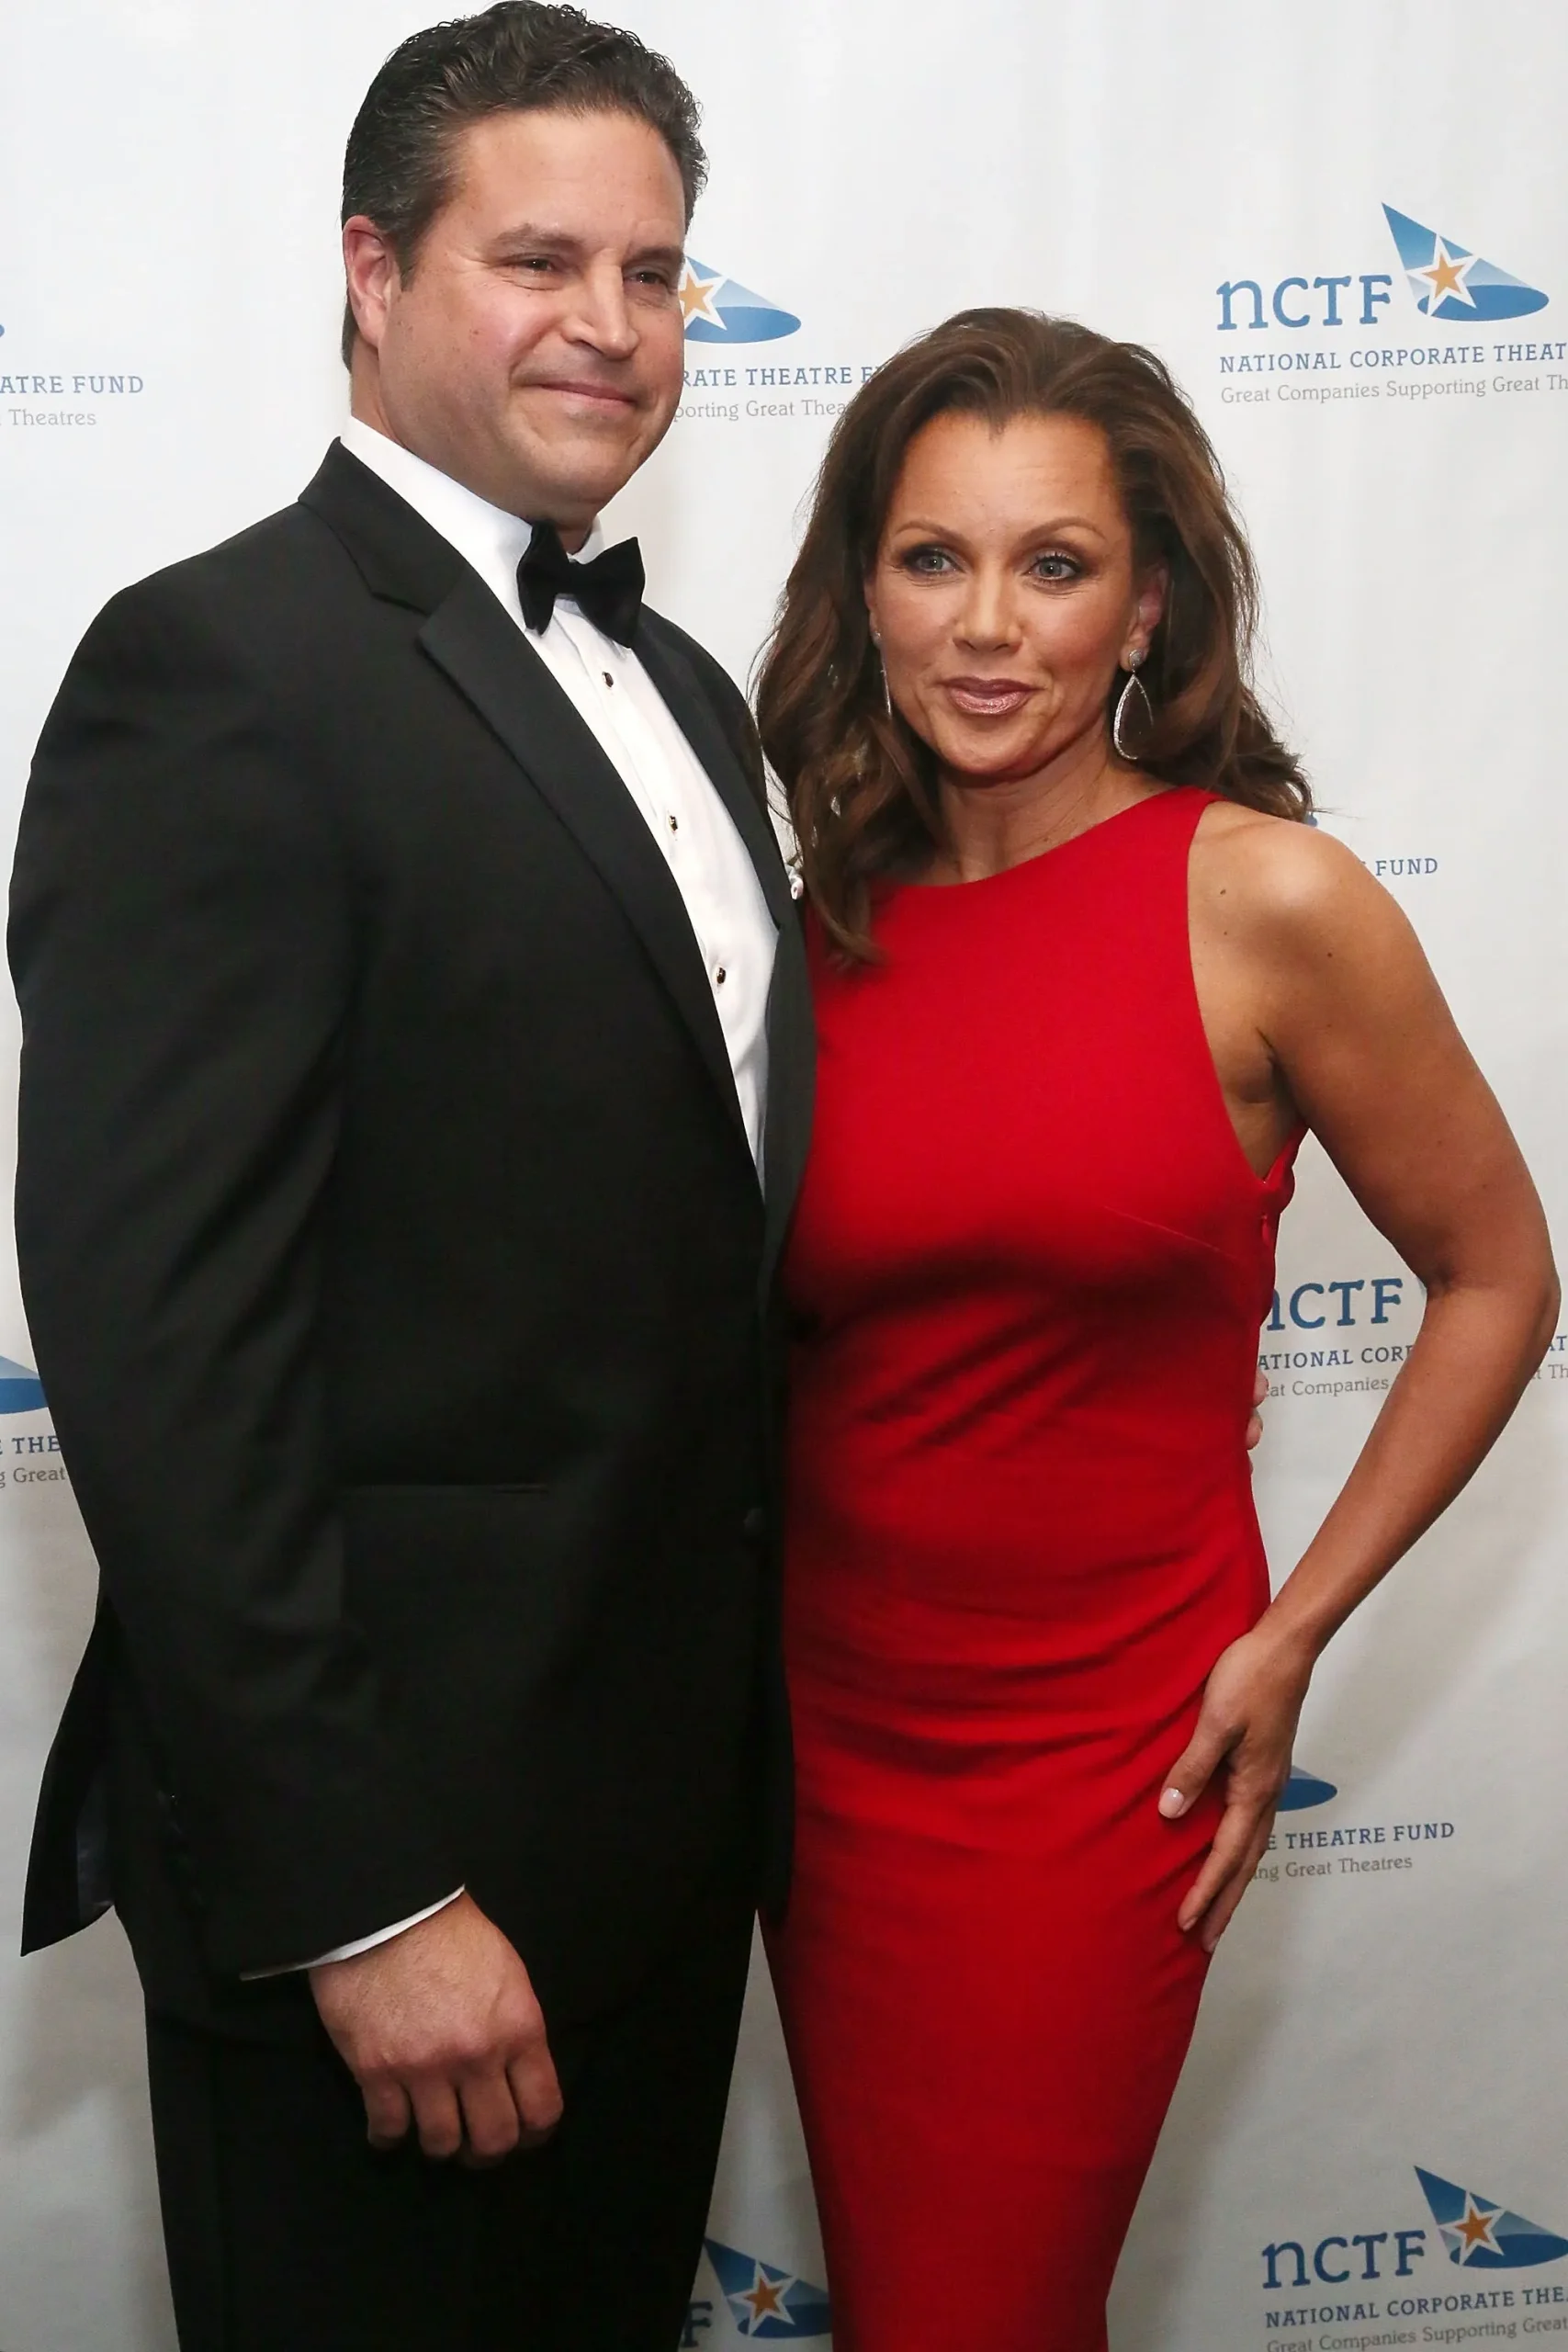 Who Is Jim Skrip? Age, Bio, Career And More Of Vanessa Williams' Husband